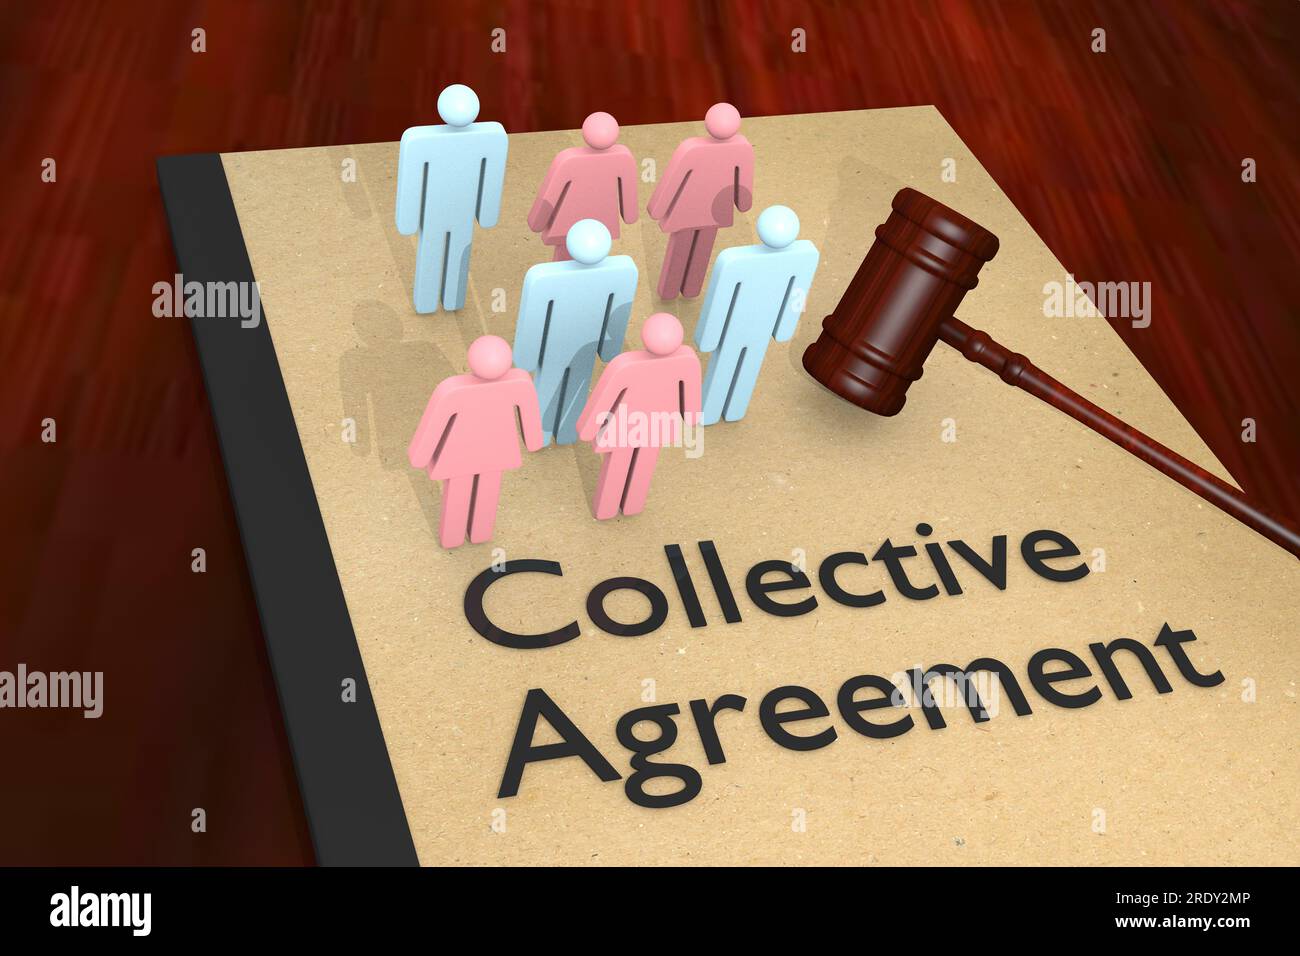 3D illustration of a judge gavel and Collective Agreement title on legal booklet, along with man and woman silhouettes. Stock Photo